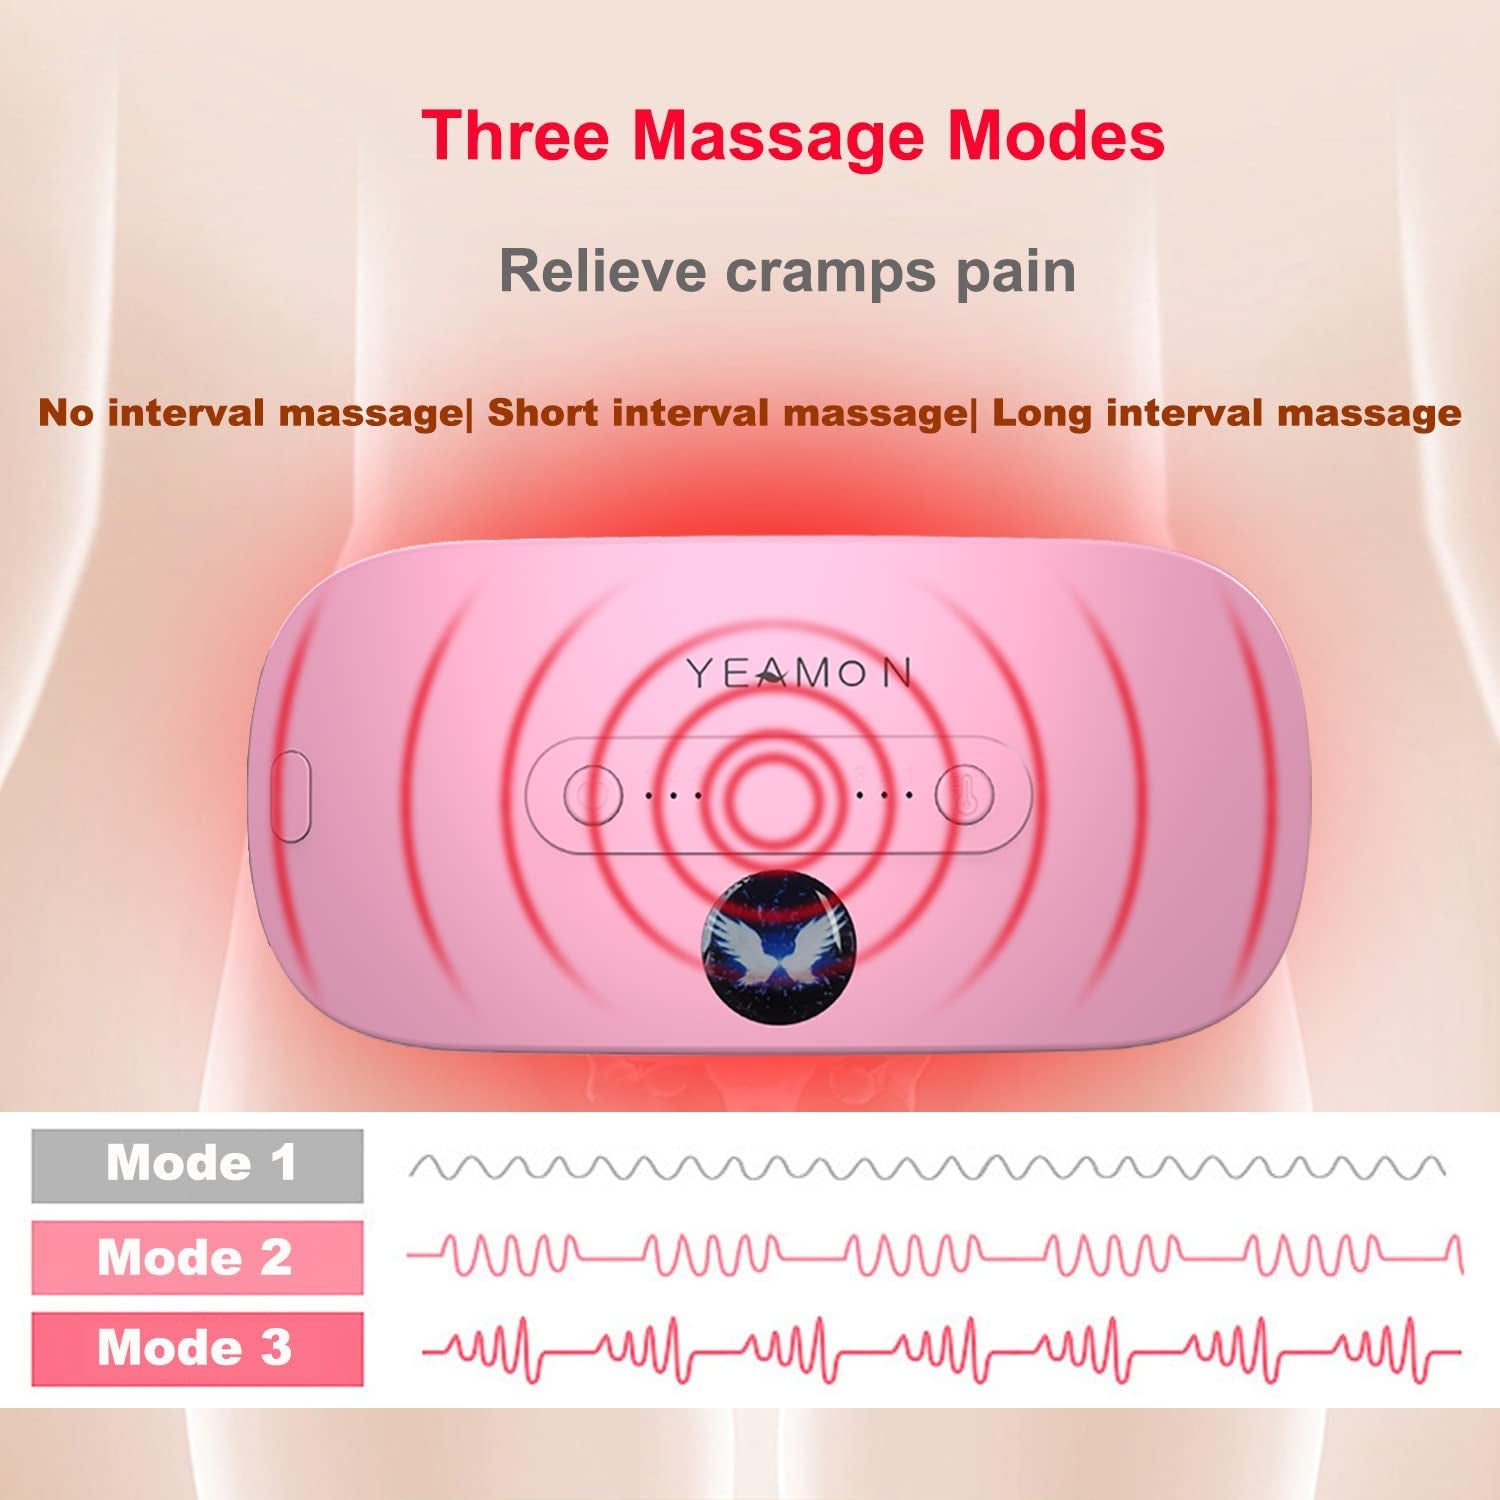 Portable Cordless Heating Pad, Electric Waist Belt Device, Fast Heating Pad with 3 Heat Levels and 3 Massage Modes, Back or Belly Heating Pad for Women and Girl